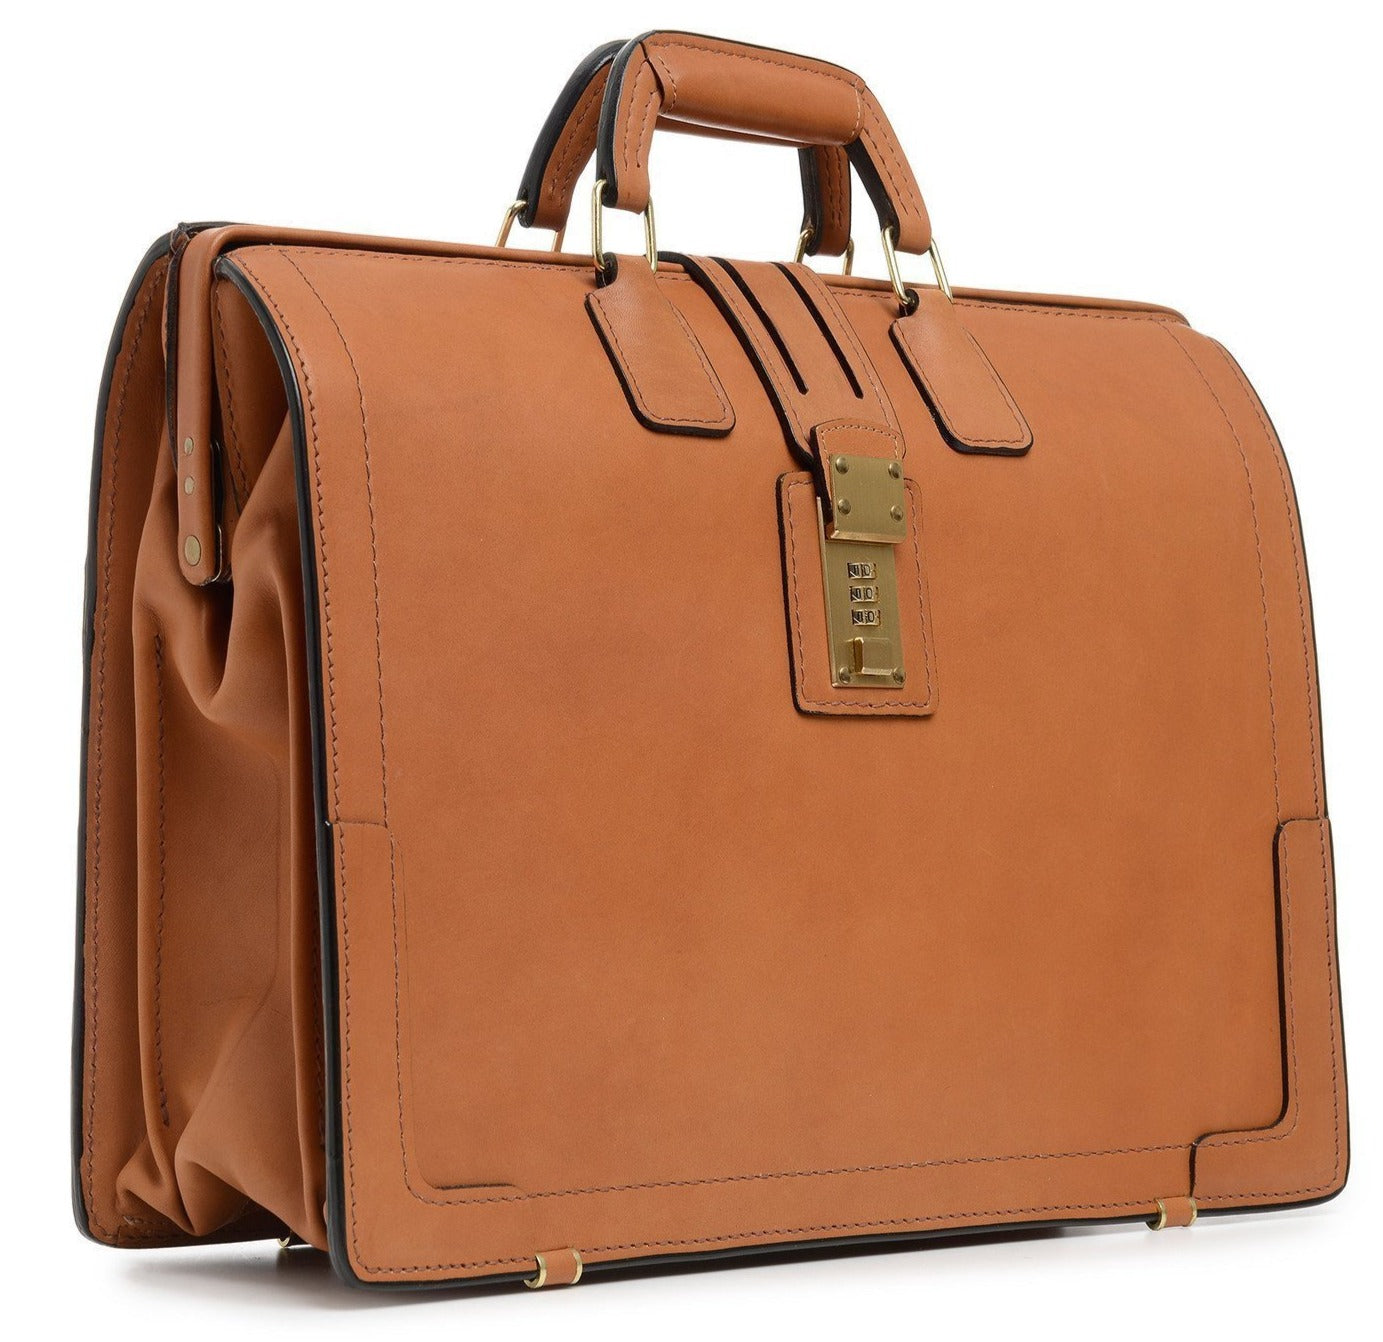 Churchill Briefcase | Classic Top Frame Leather | Korchmar Lawyers Briefcase-Briefcase-Sterling-and-Burke